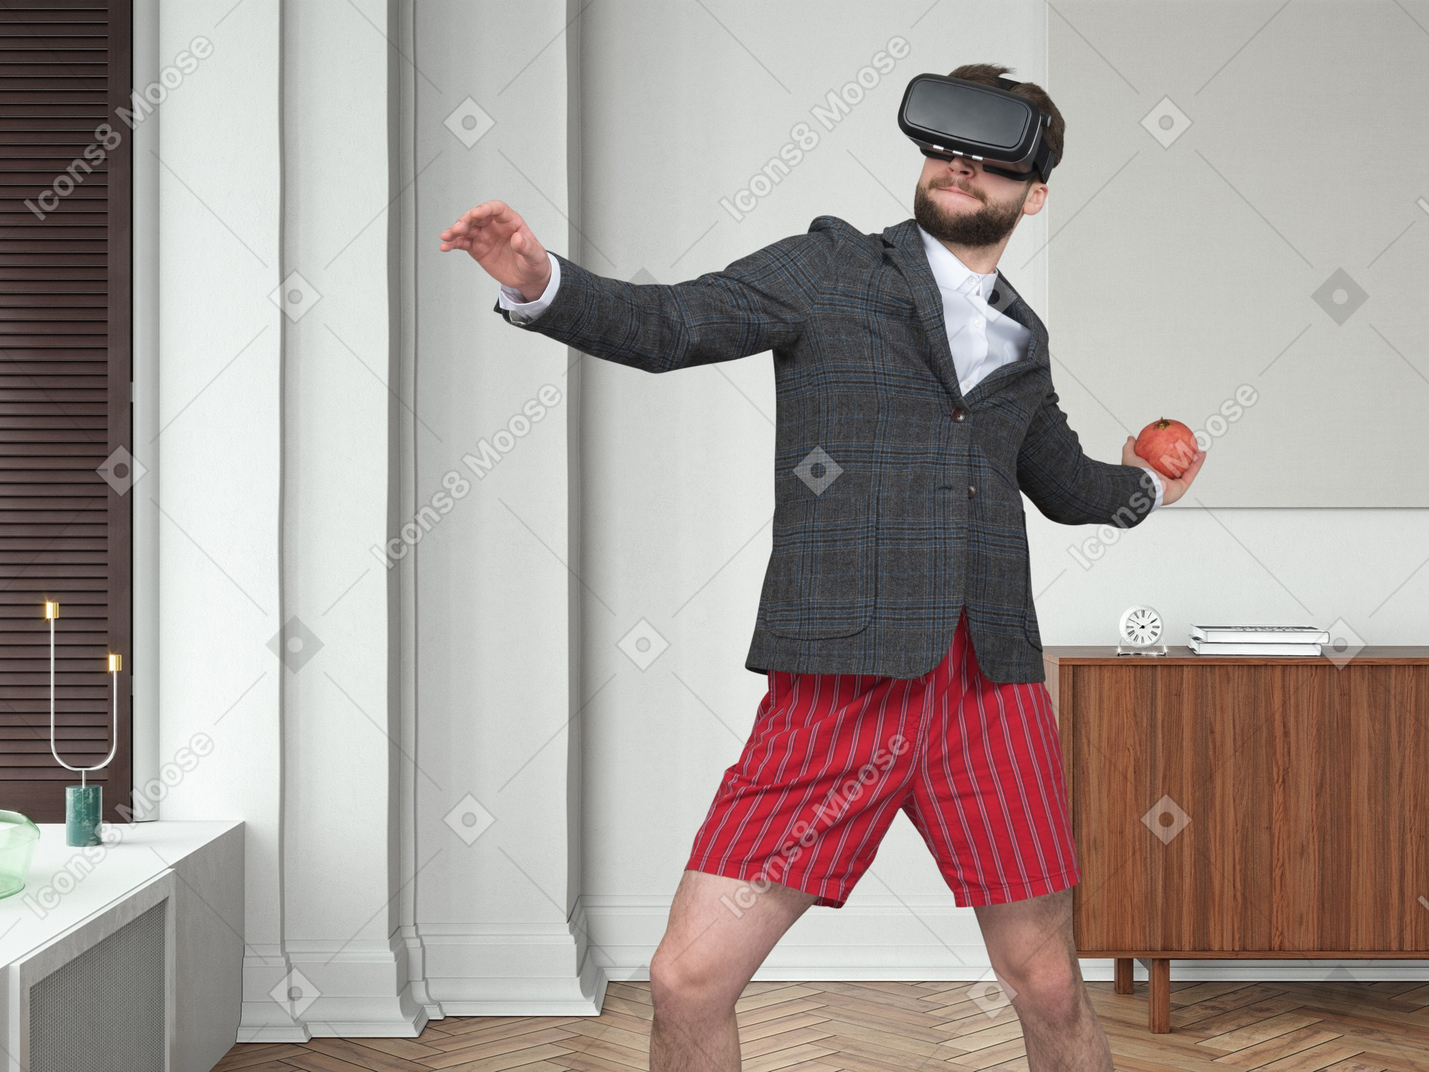 Man playing a vr game